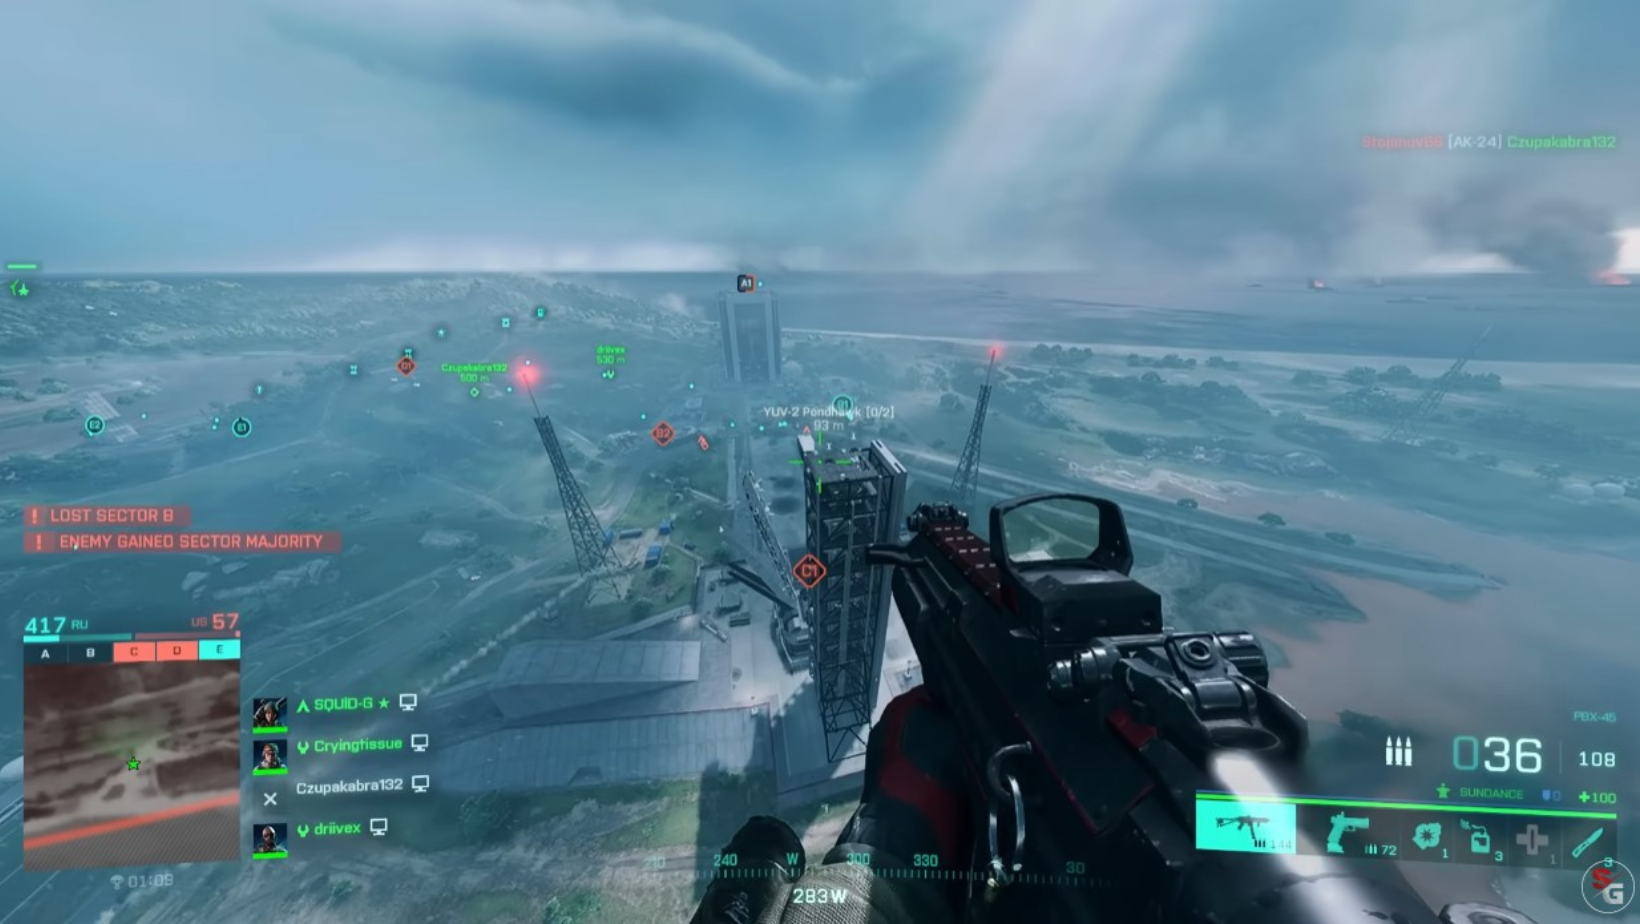 Battlefield 2042 Technical Playtest Reportedly Runs “Much Smoother” on Xbox Consoles than PC